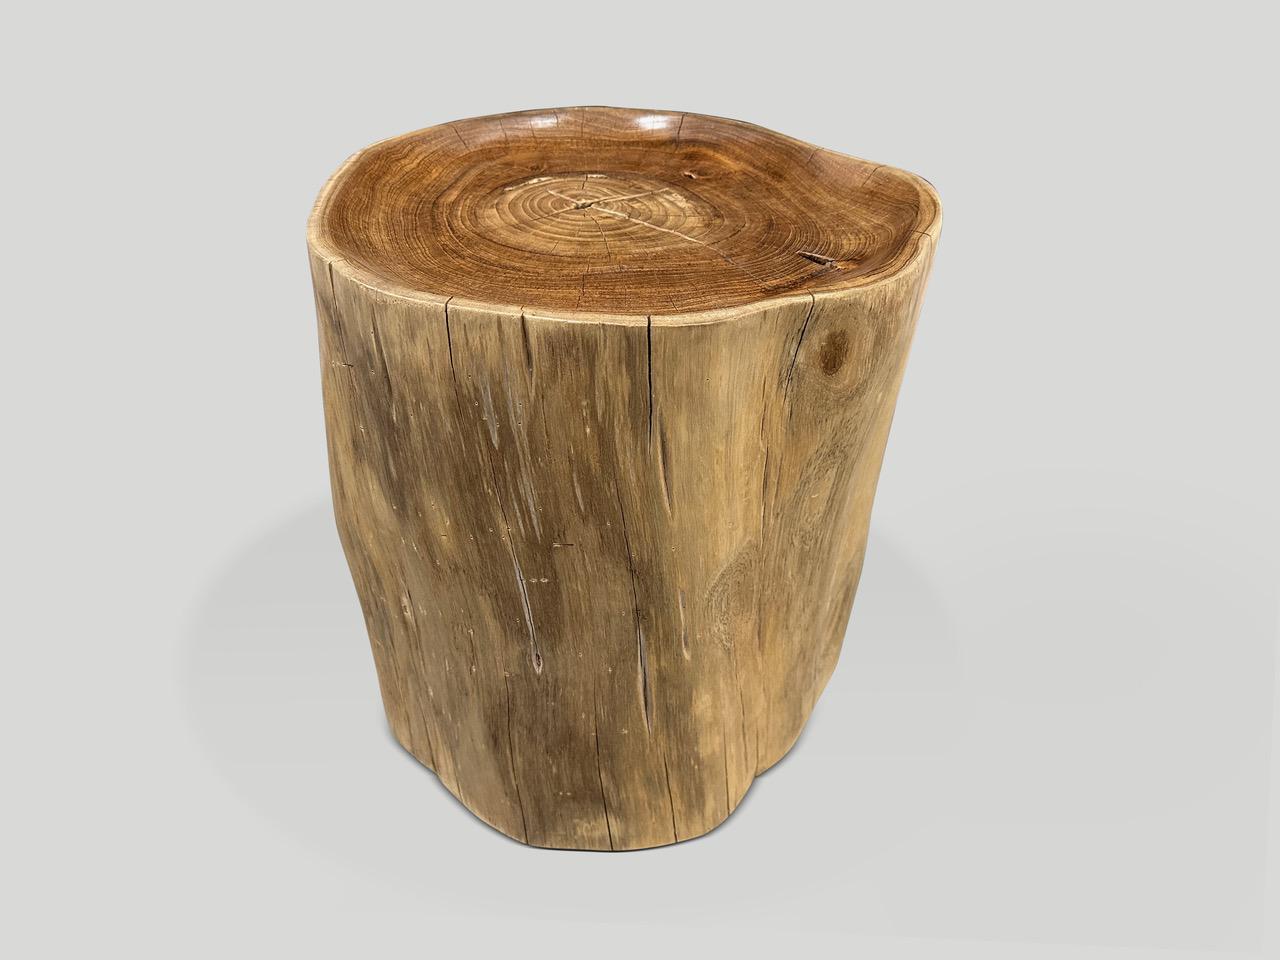 Natural organic formed reclaimed teak root side table. We hand carved the top section into a tray style and polished the aged teak with a natural oil revealing the beautiful wood grain. Both usable and sculptural. We have a collection. All unique.